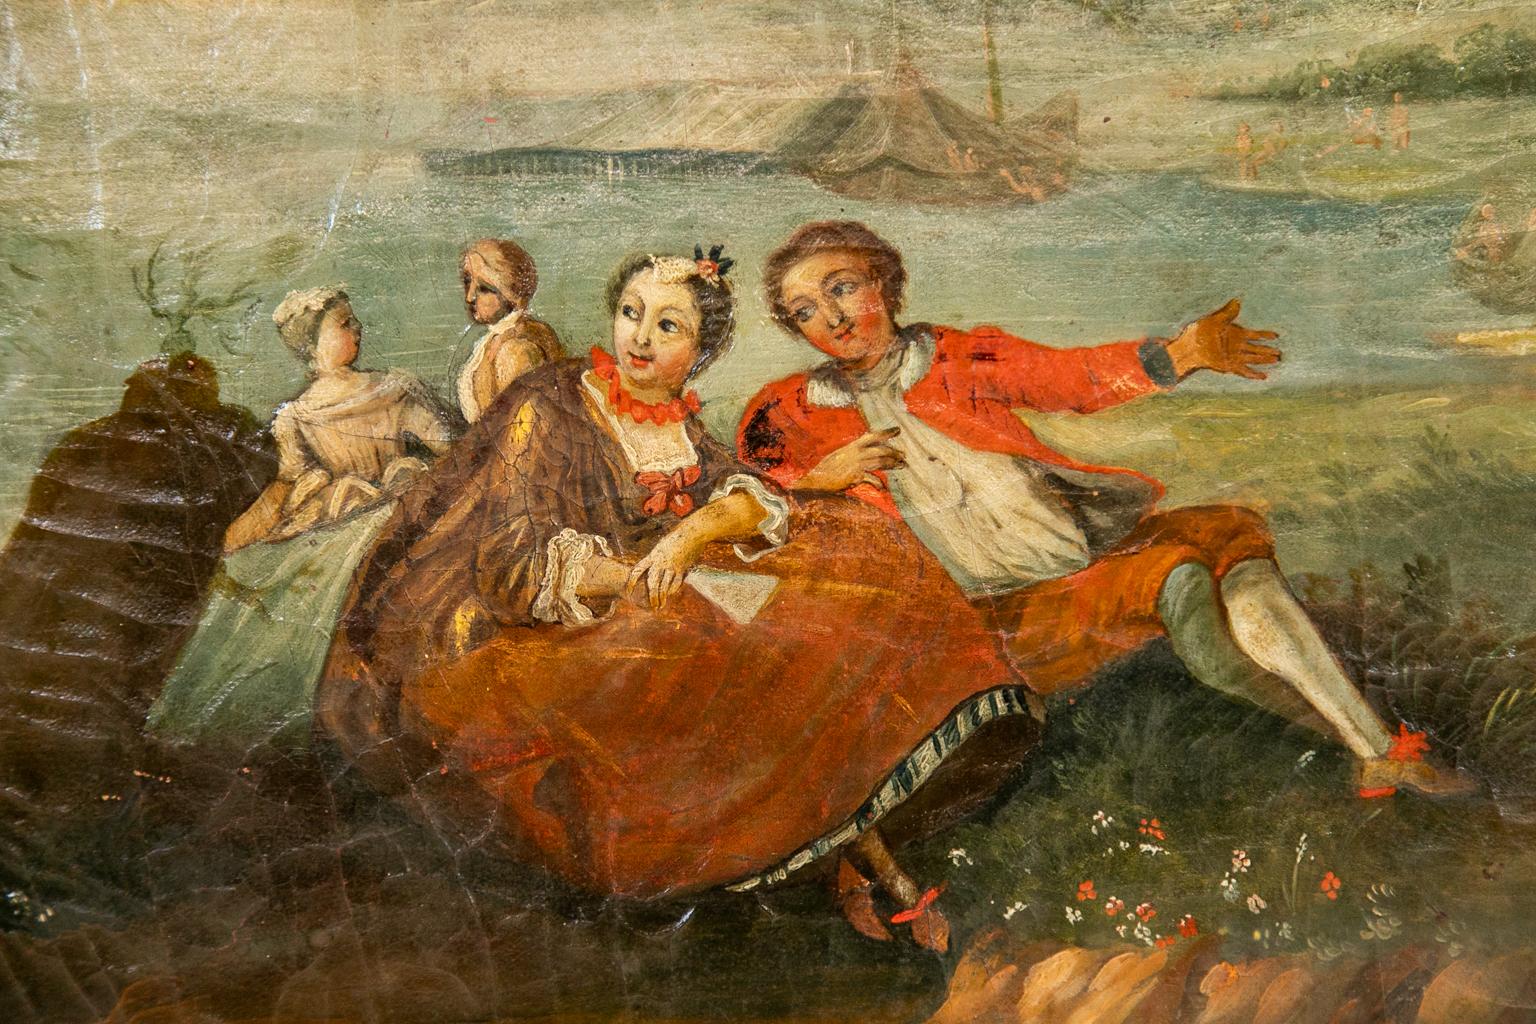 Early 19th century French marine landscape oil painting, the characters are painted depicting courting poses. It is framed very nicely in a carved oak scalloped frame which appears to be original.